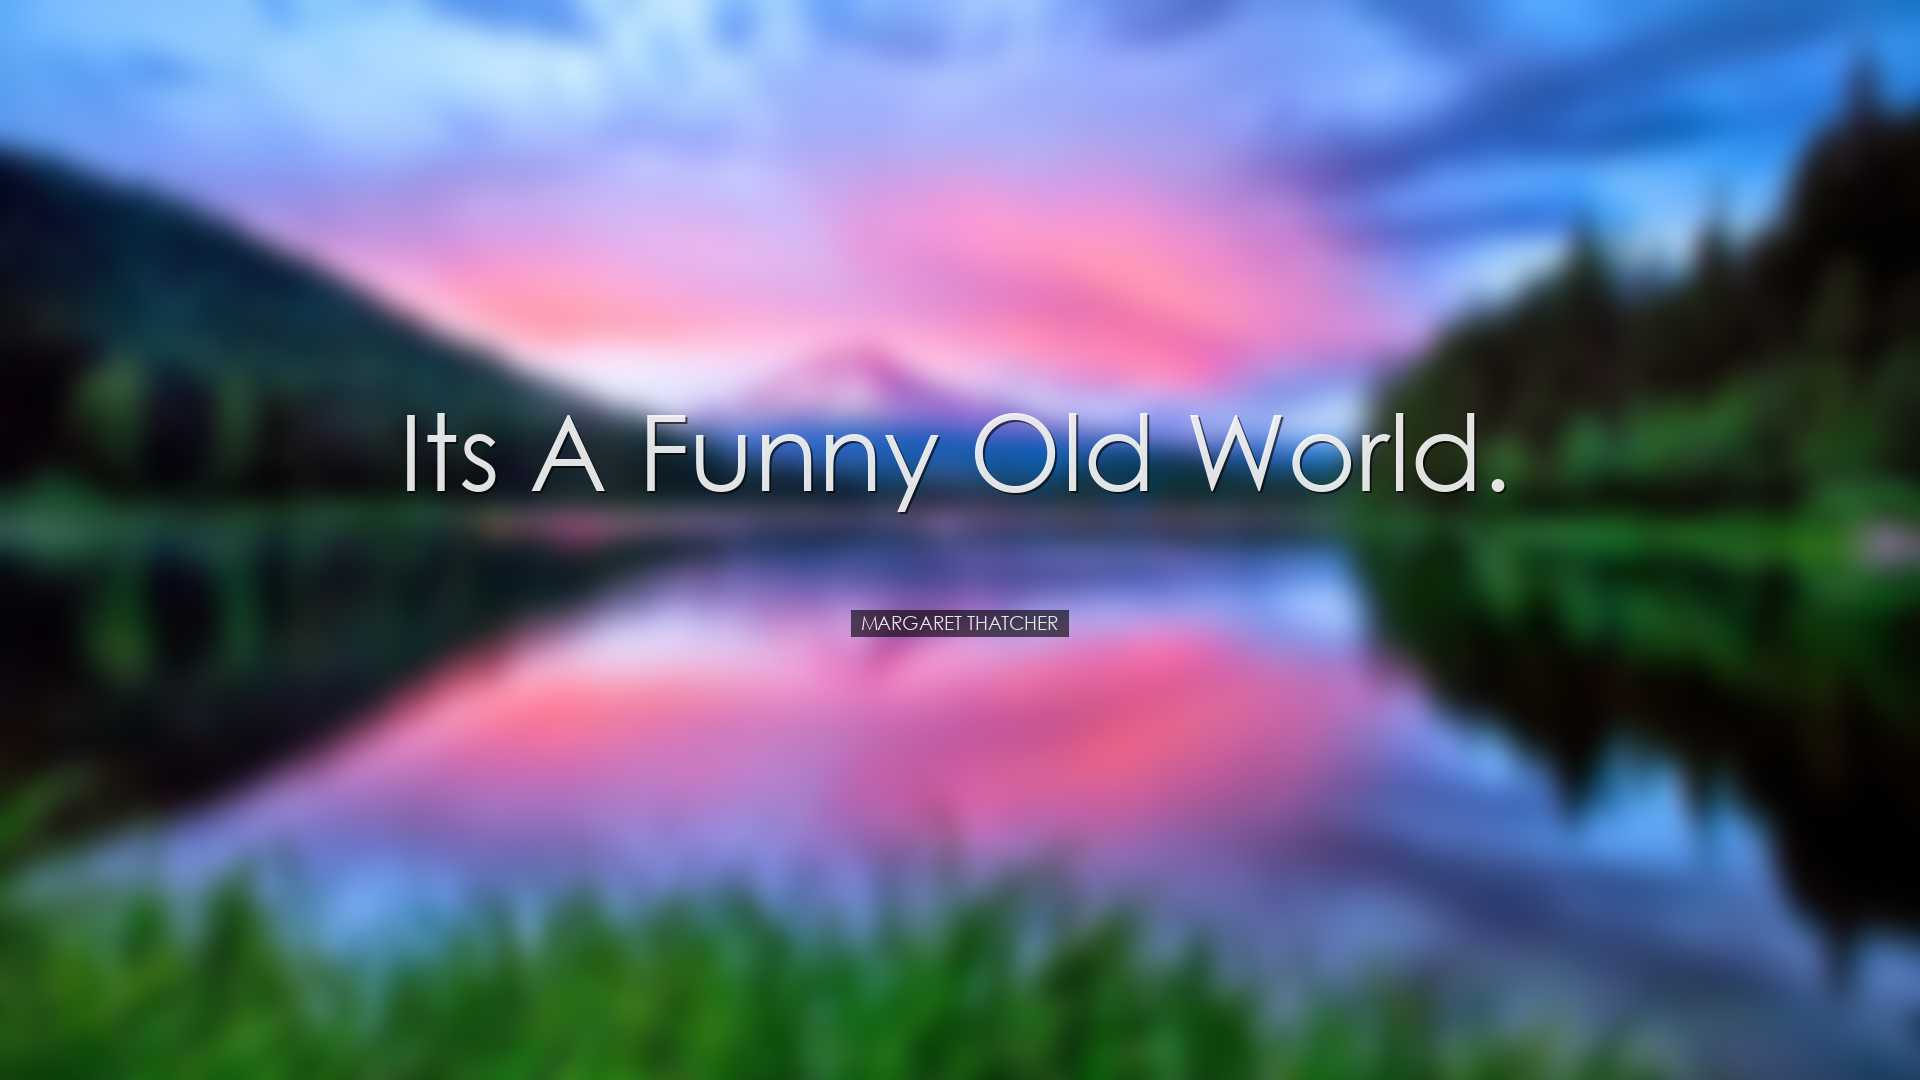 Its a funny old world. - Margaret Thatcher